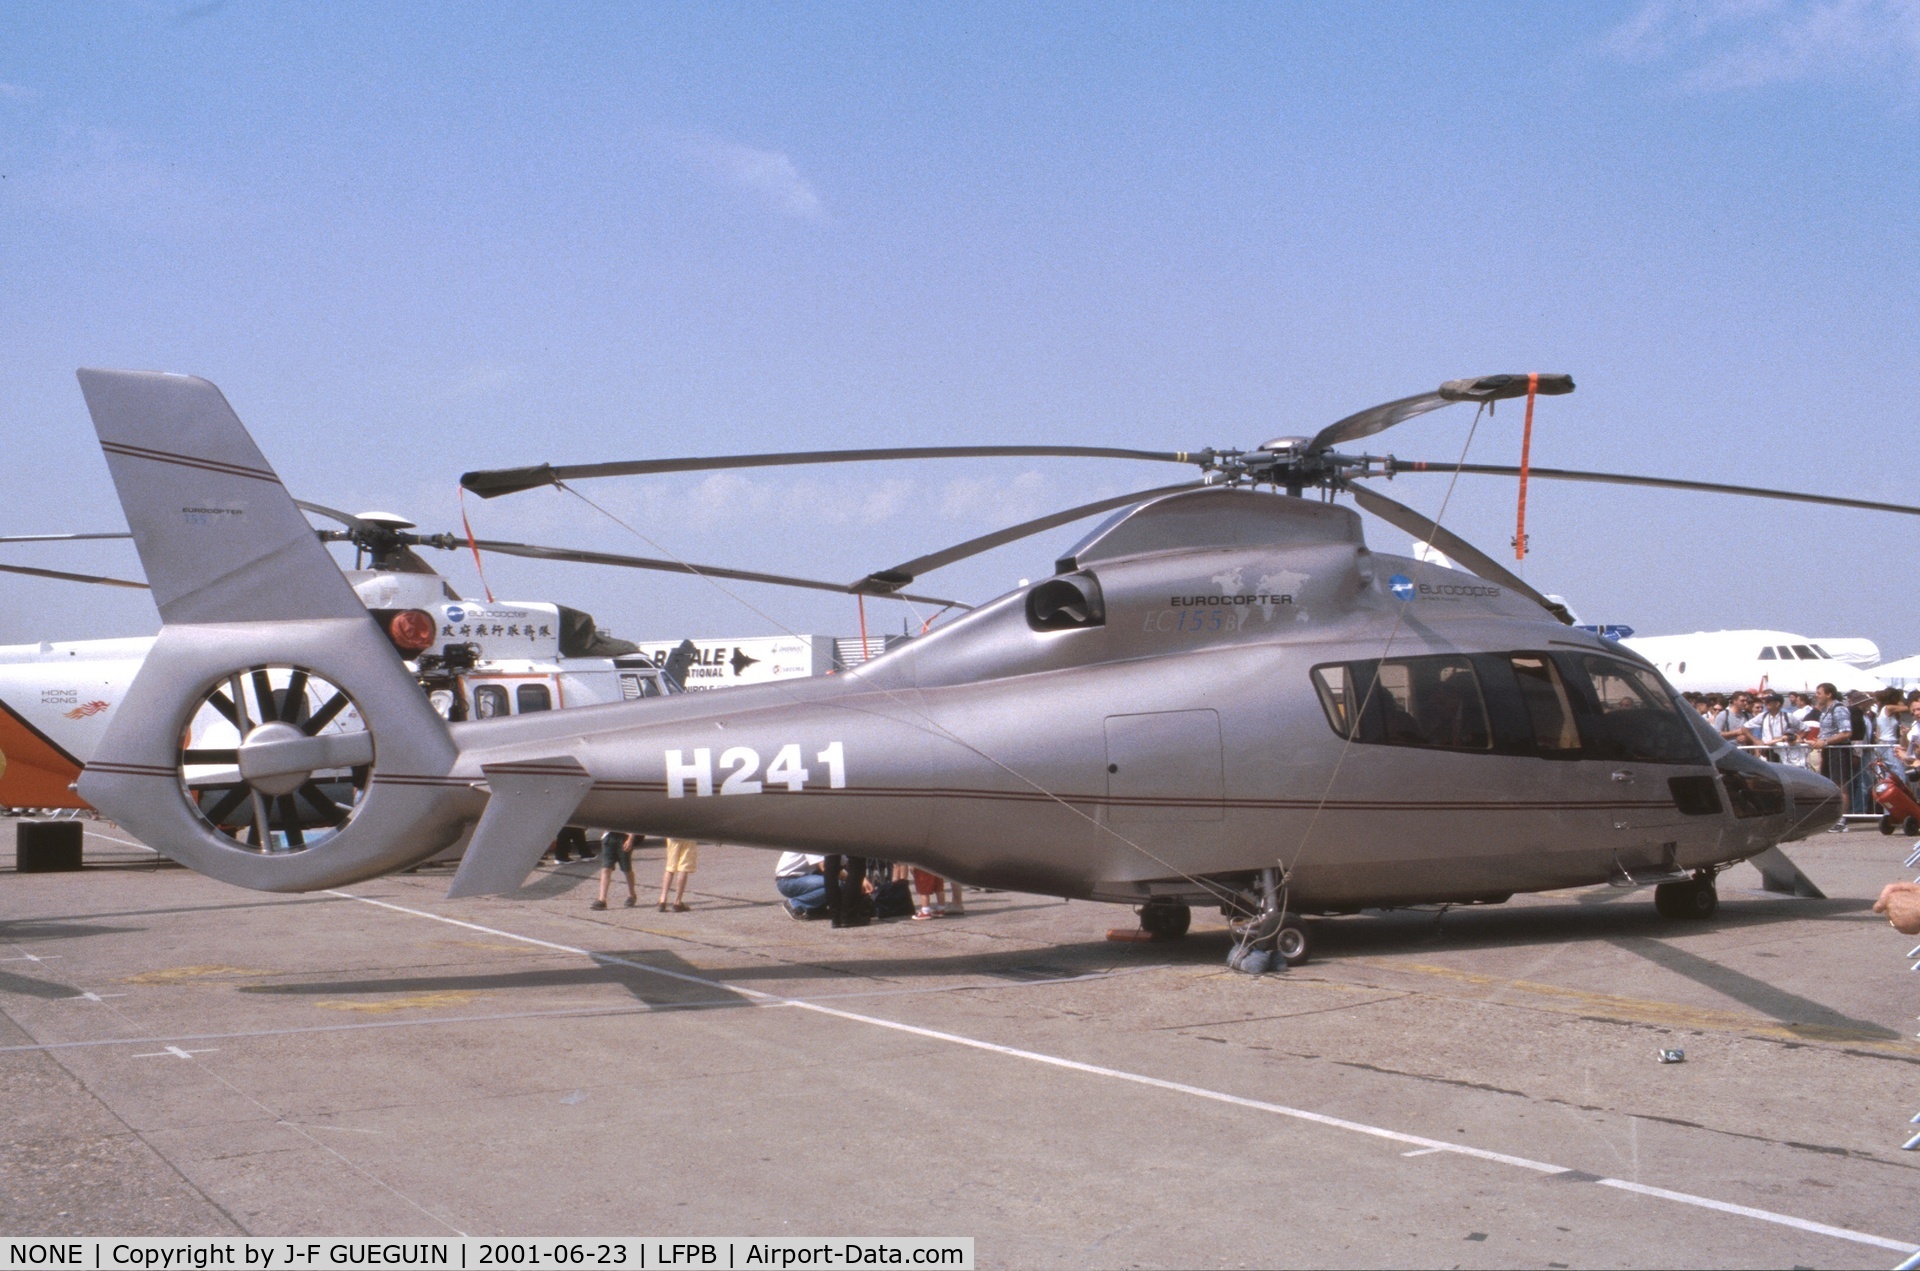 NONE, Eurocopter EC-155B Dauphin (Mock-up) C/N None - Replica, On display at 2001 paris-Le Bourget airshow.